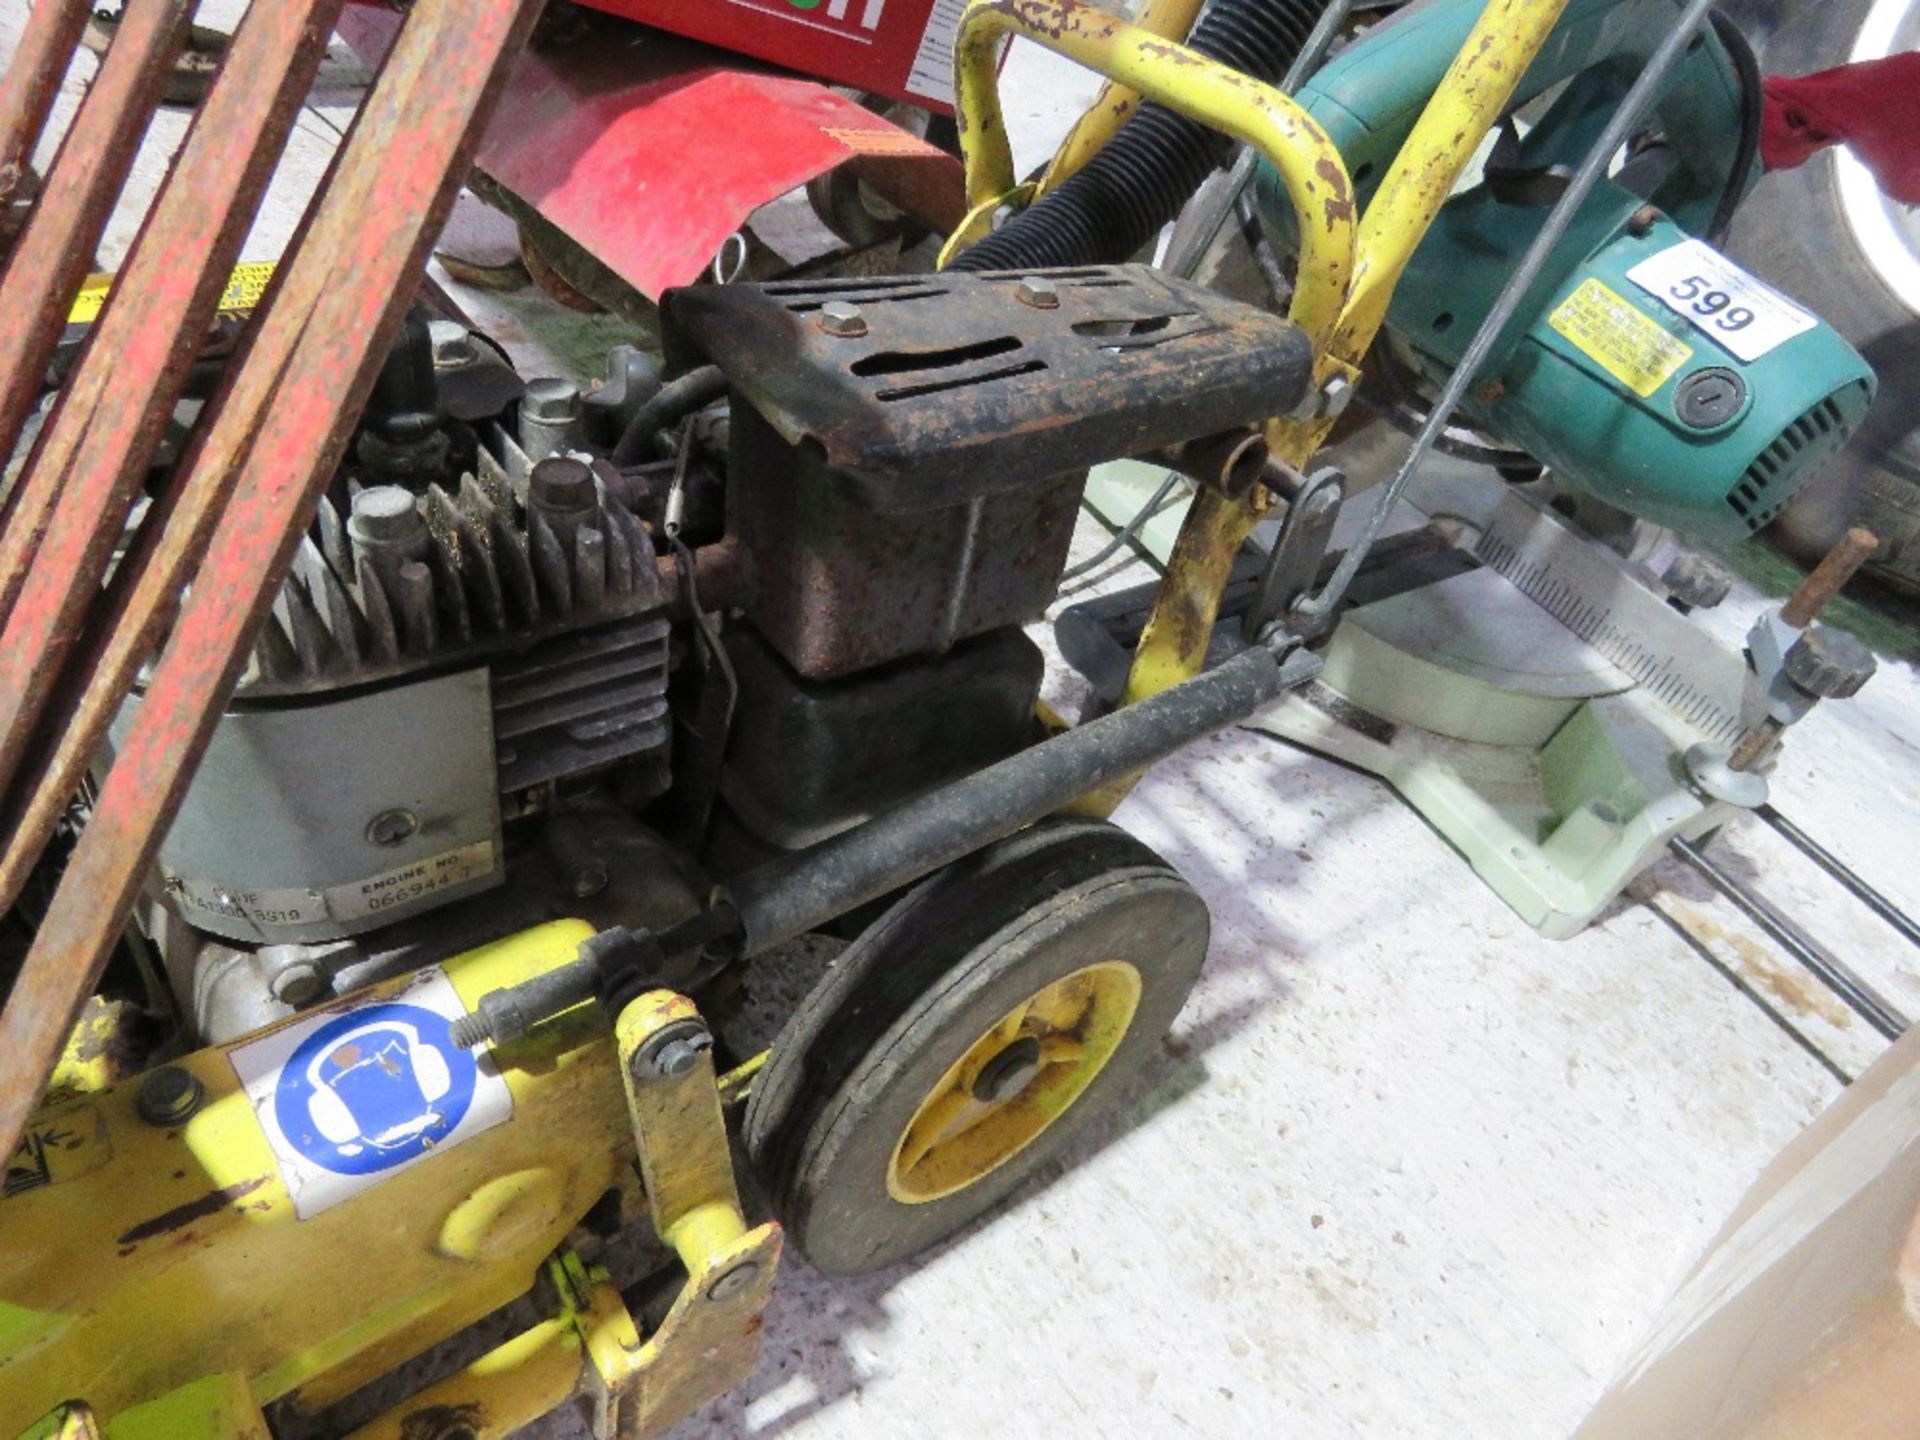 JOHN DEERE E35 PETROL ENGINED LAWN EDGER PLUS 2 X EDGING FORKS.OWNER MOVING HOUSE.....THIS LOT IS SO - Image 4 of 8